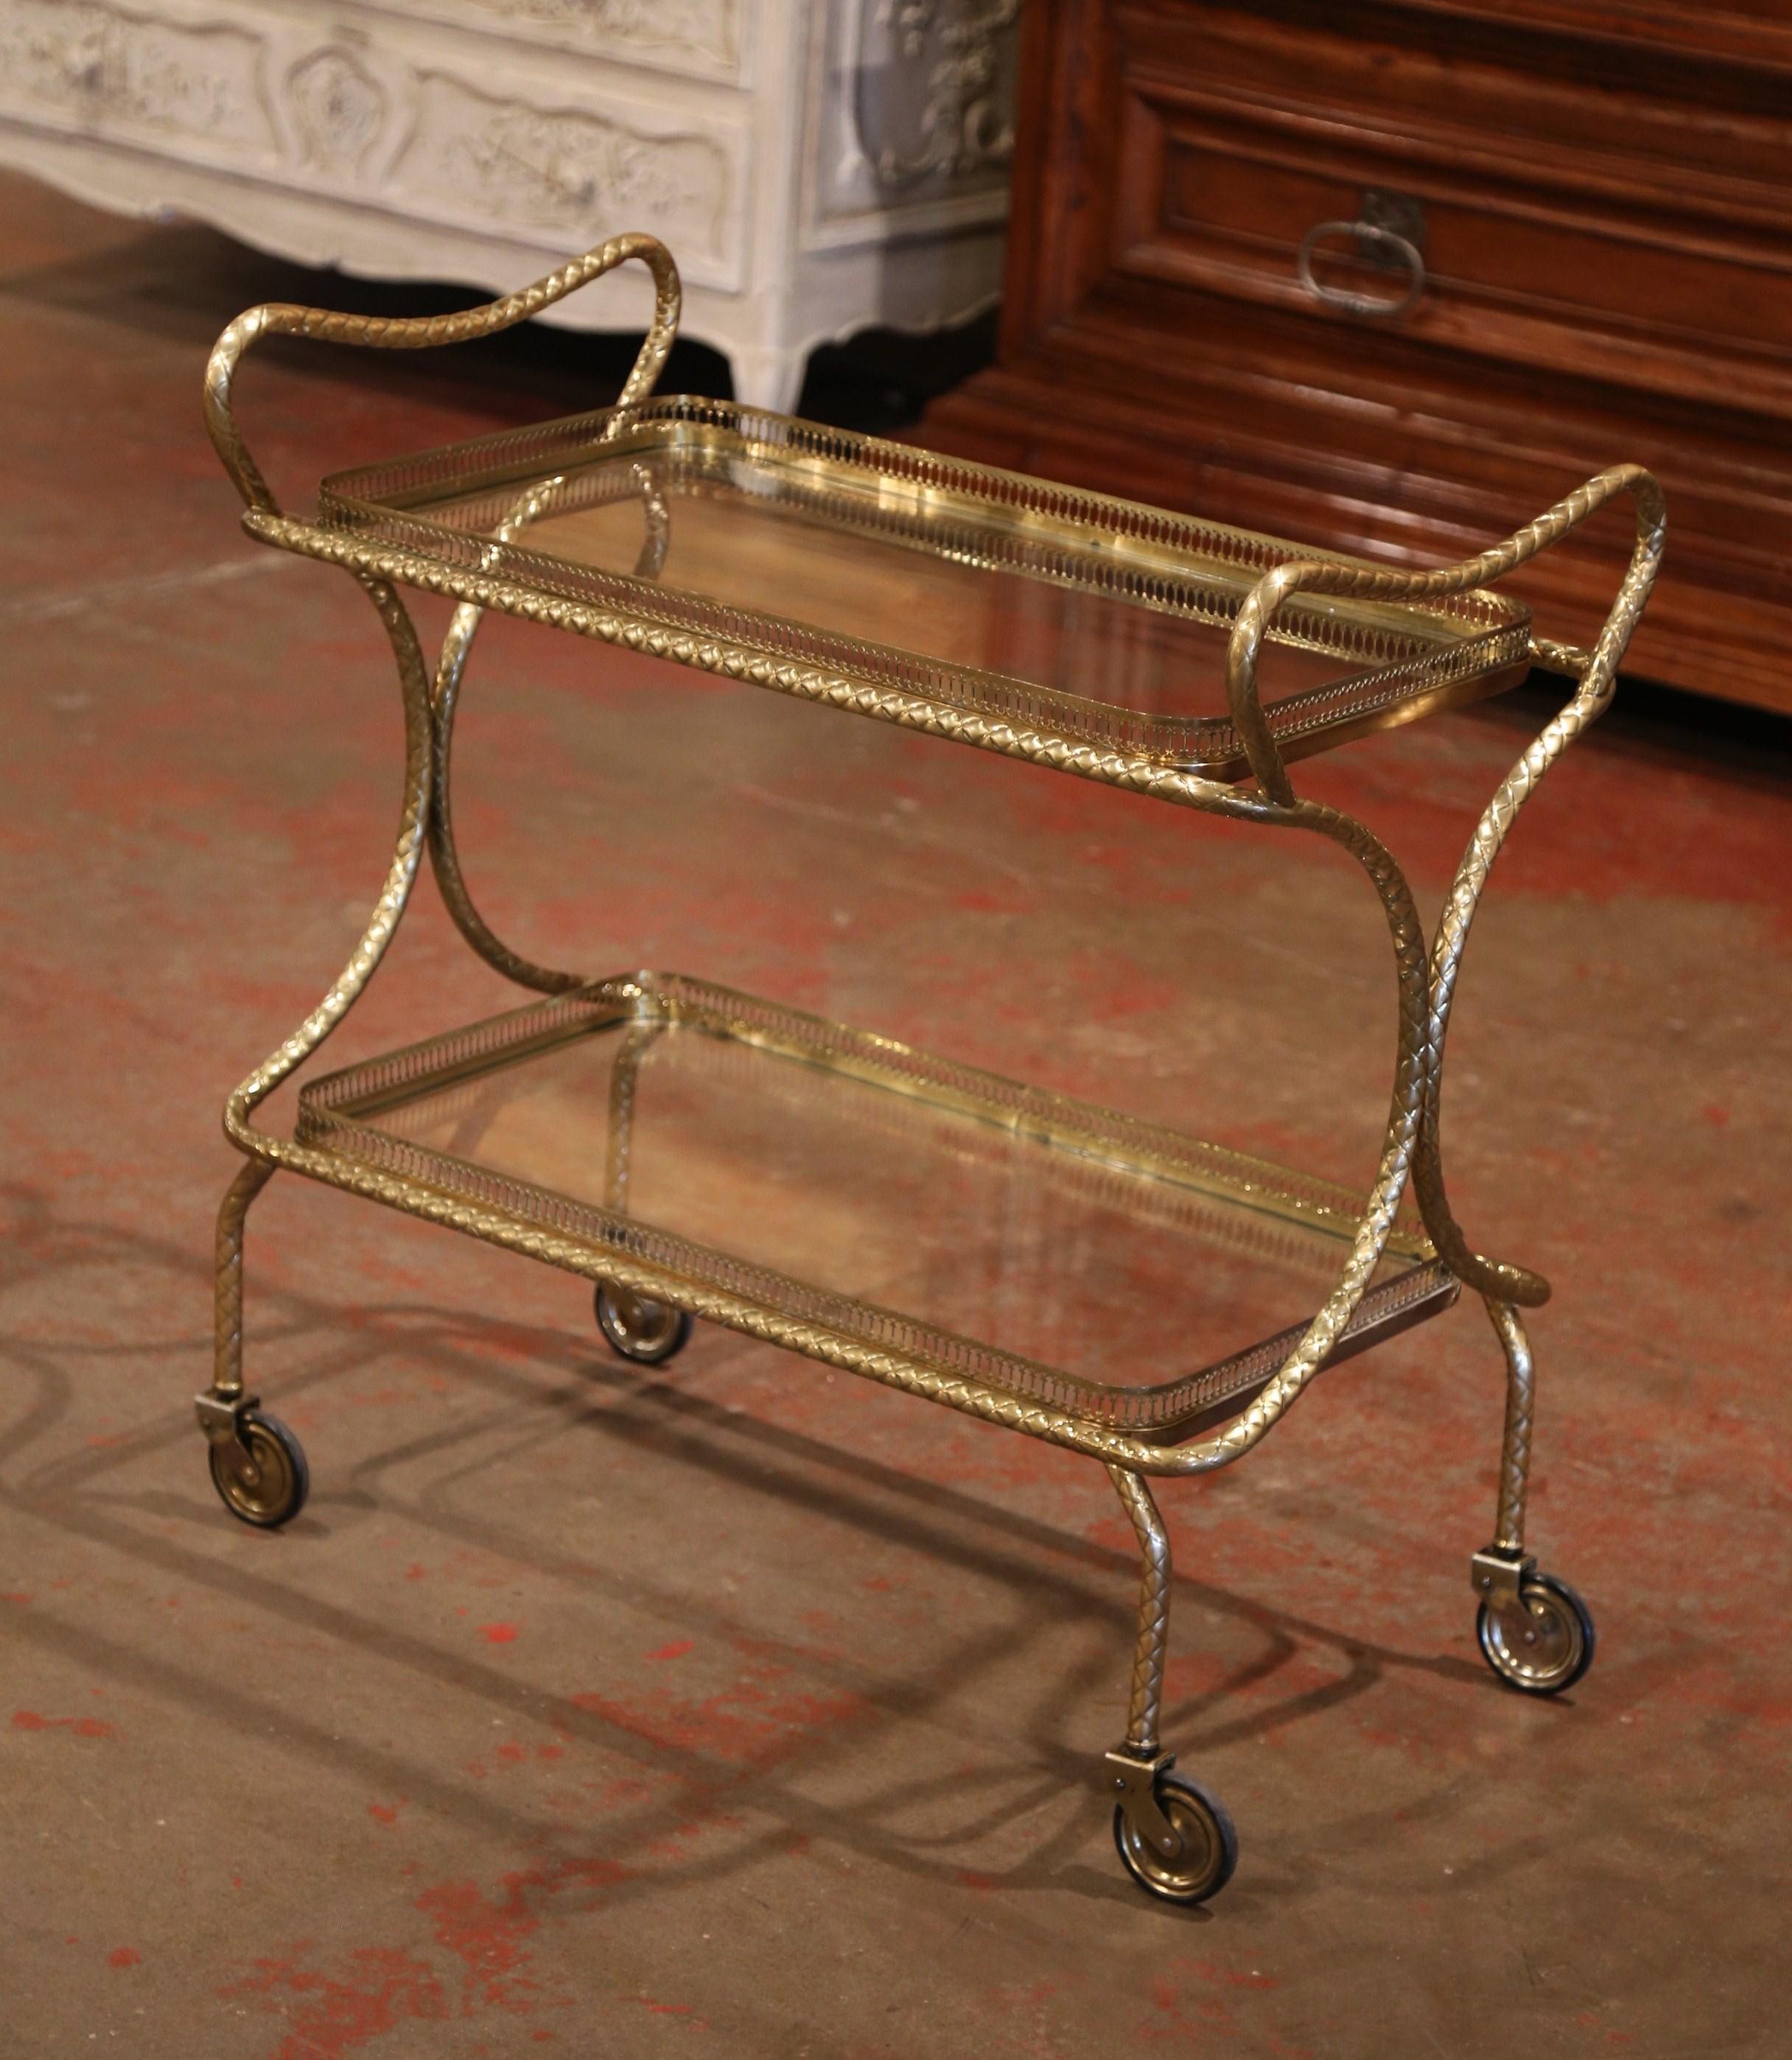 This elegant, vintage rolling bar cart was created in France, circa 193. Attributed to Maison Jansen, the rectangular desert table has a brass frame, small wheels with rubber tires over curved legs, and two rectangular plateaus topped with glass